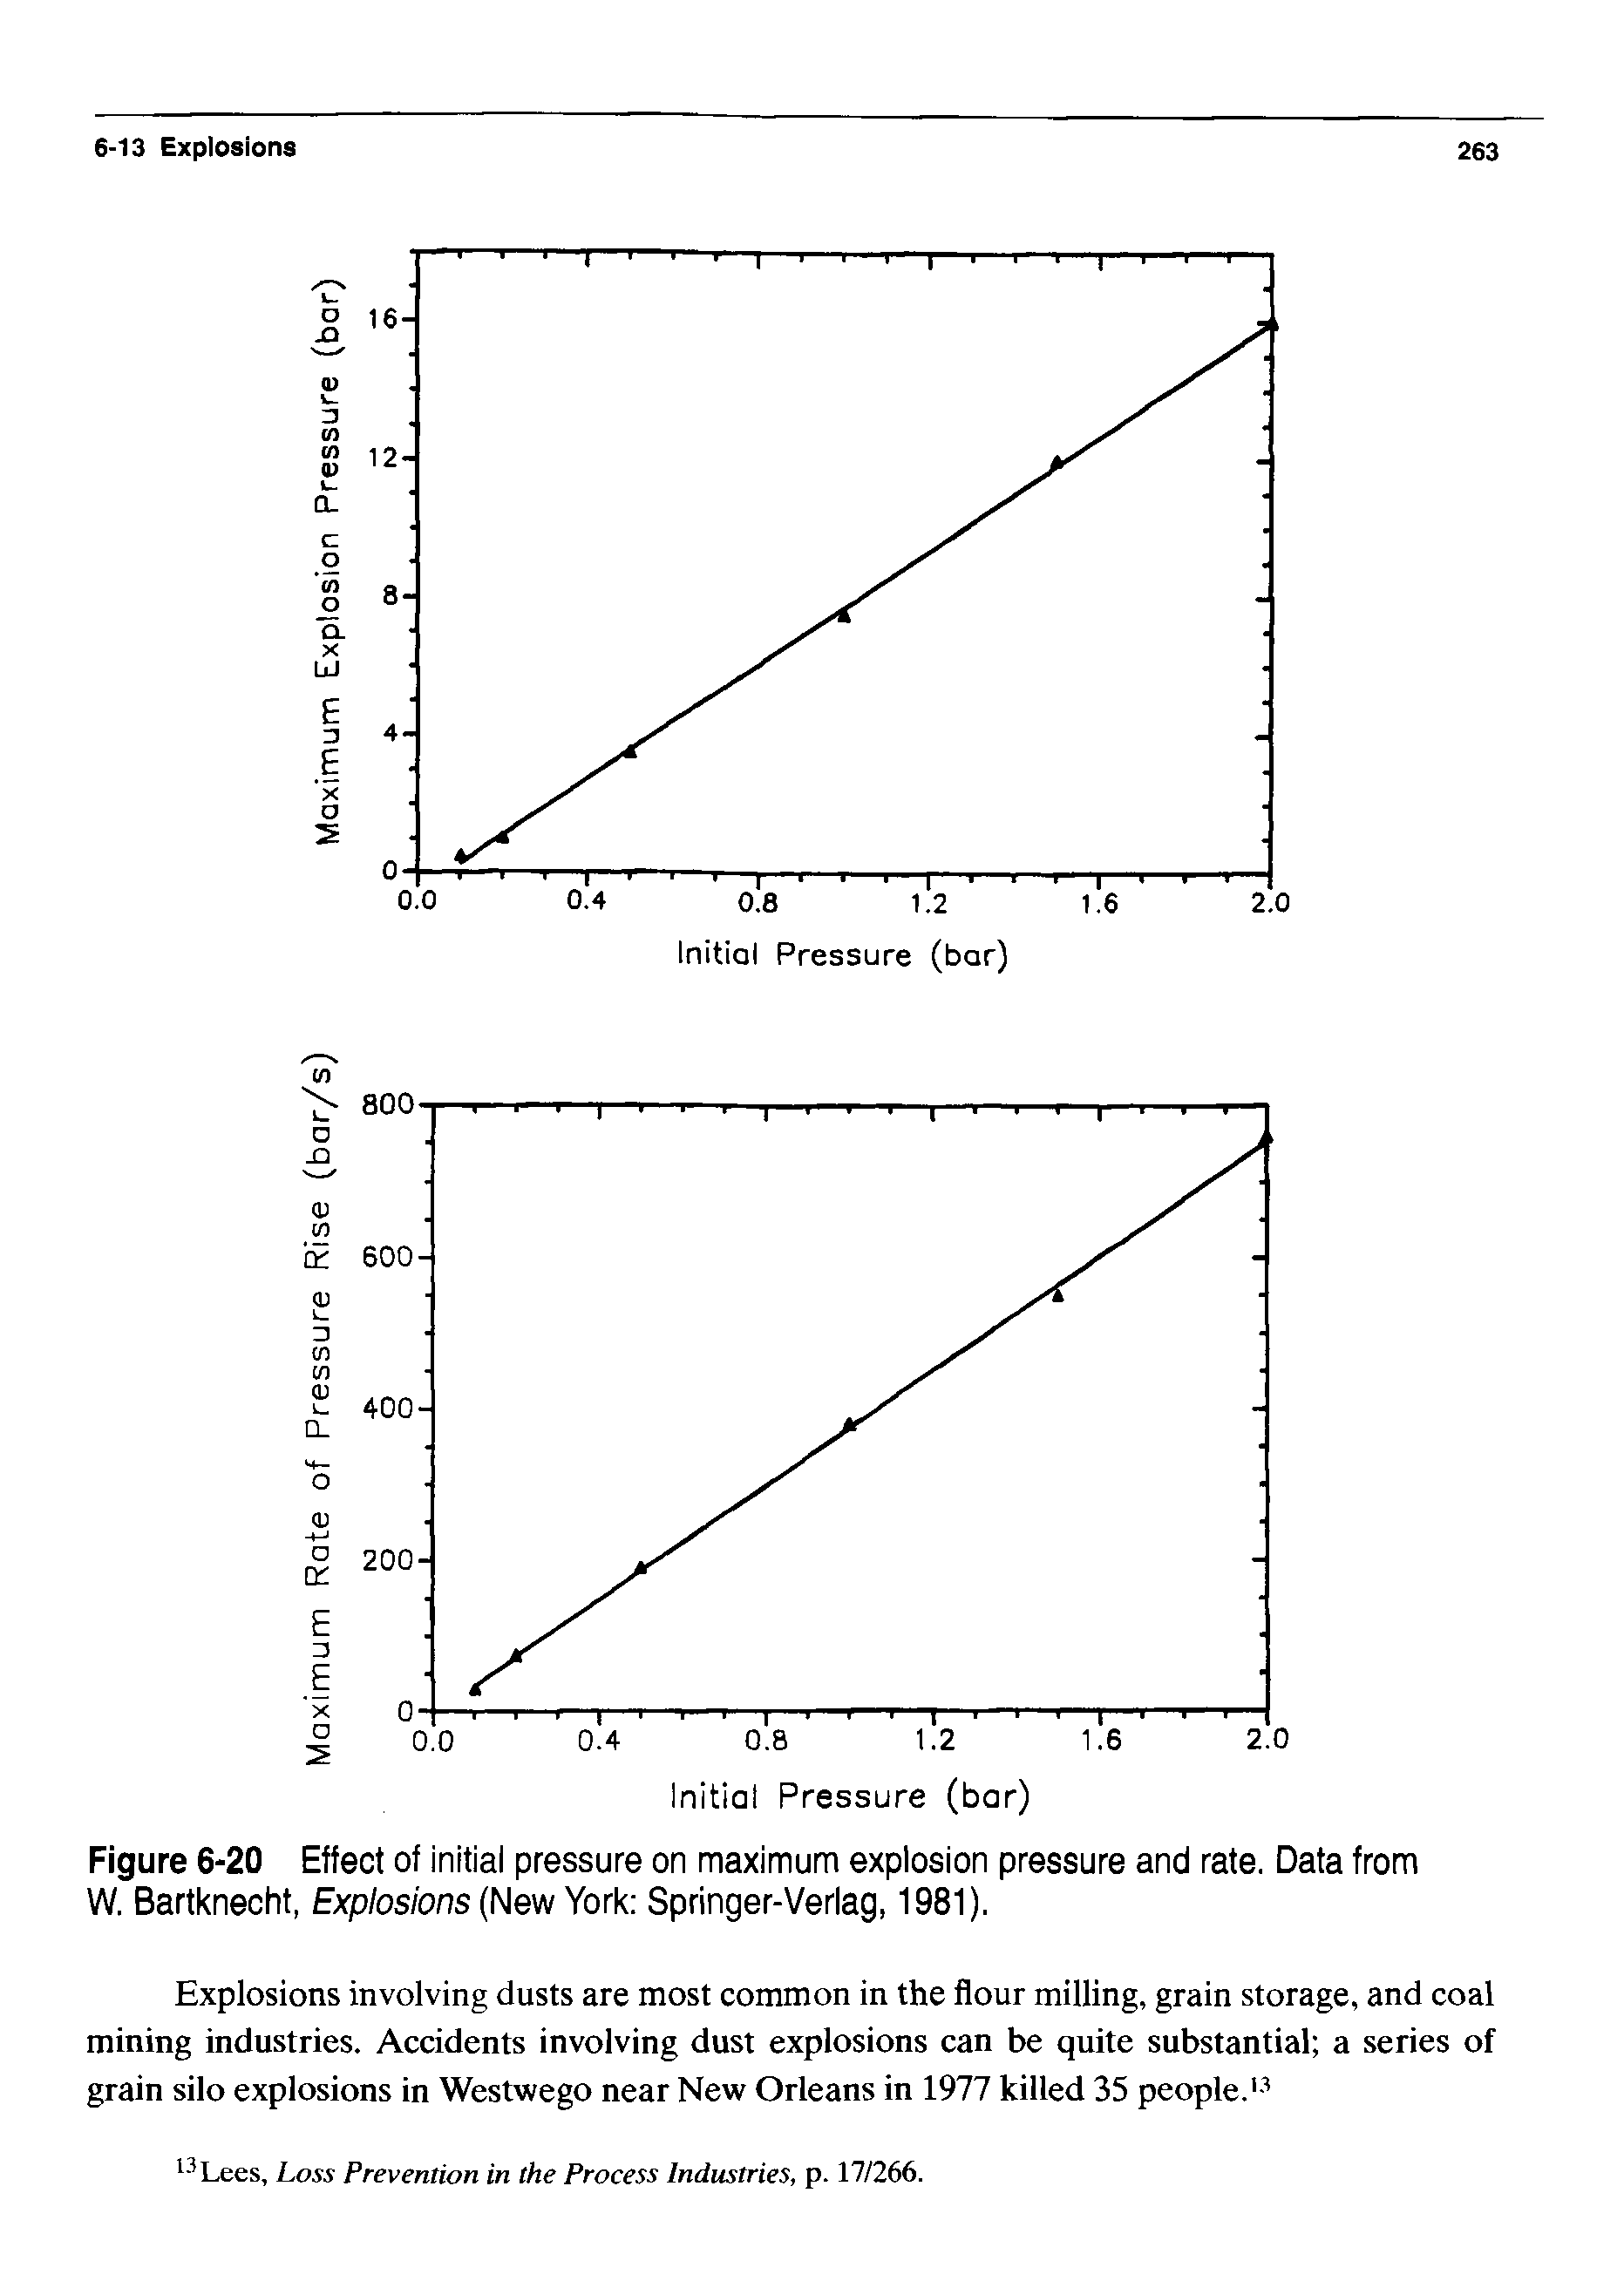 Figure 6-20 Effect of initial pressure on maximum explosion pressure and rate. Data from W. Bartknecht, Explosions (New York Springer-Verlag, 1981).